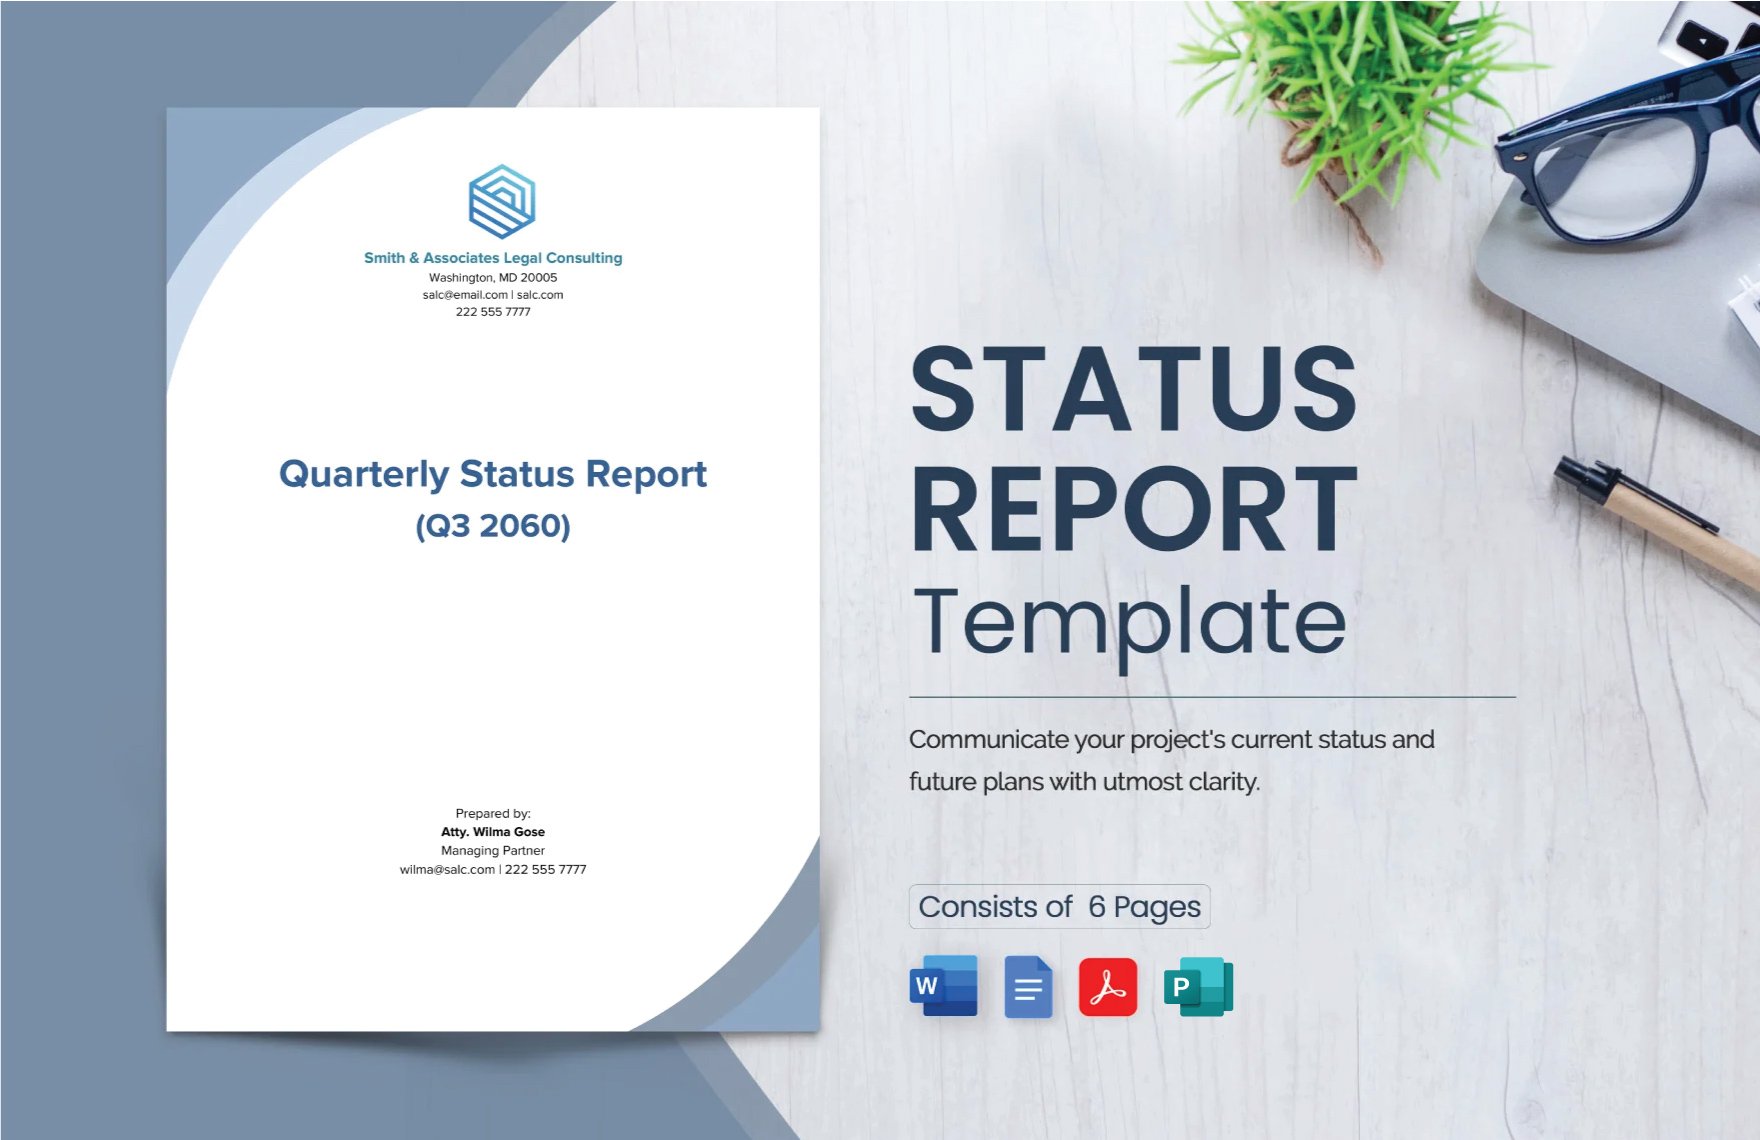 Status Report Template in Word, Google Docs, PDF, Publisher, InDesign